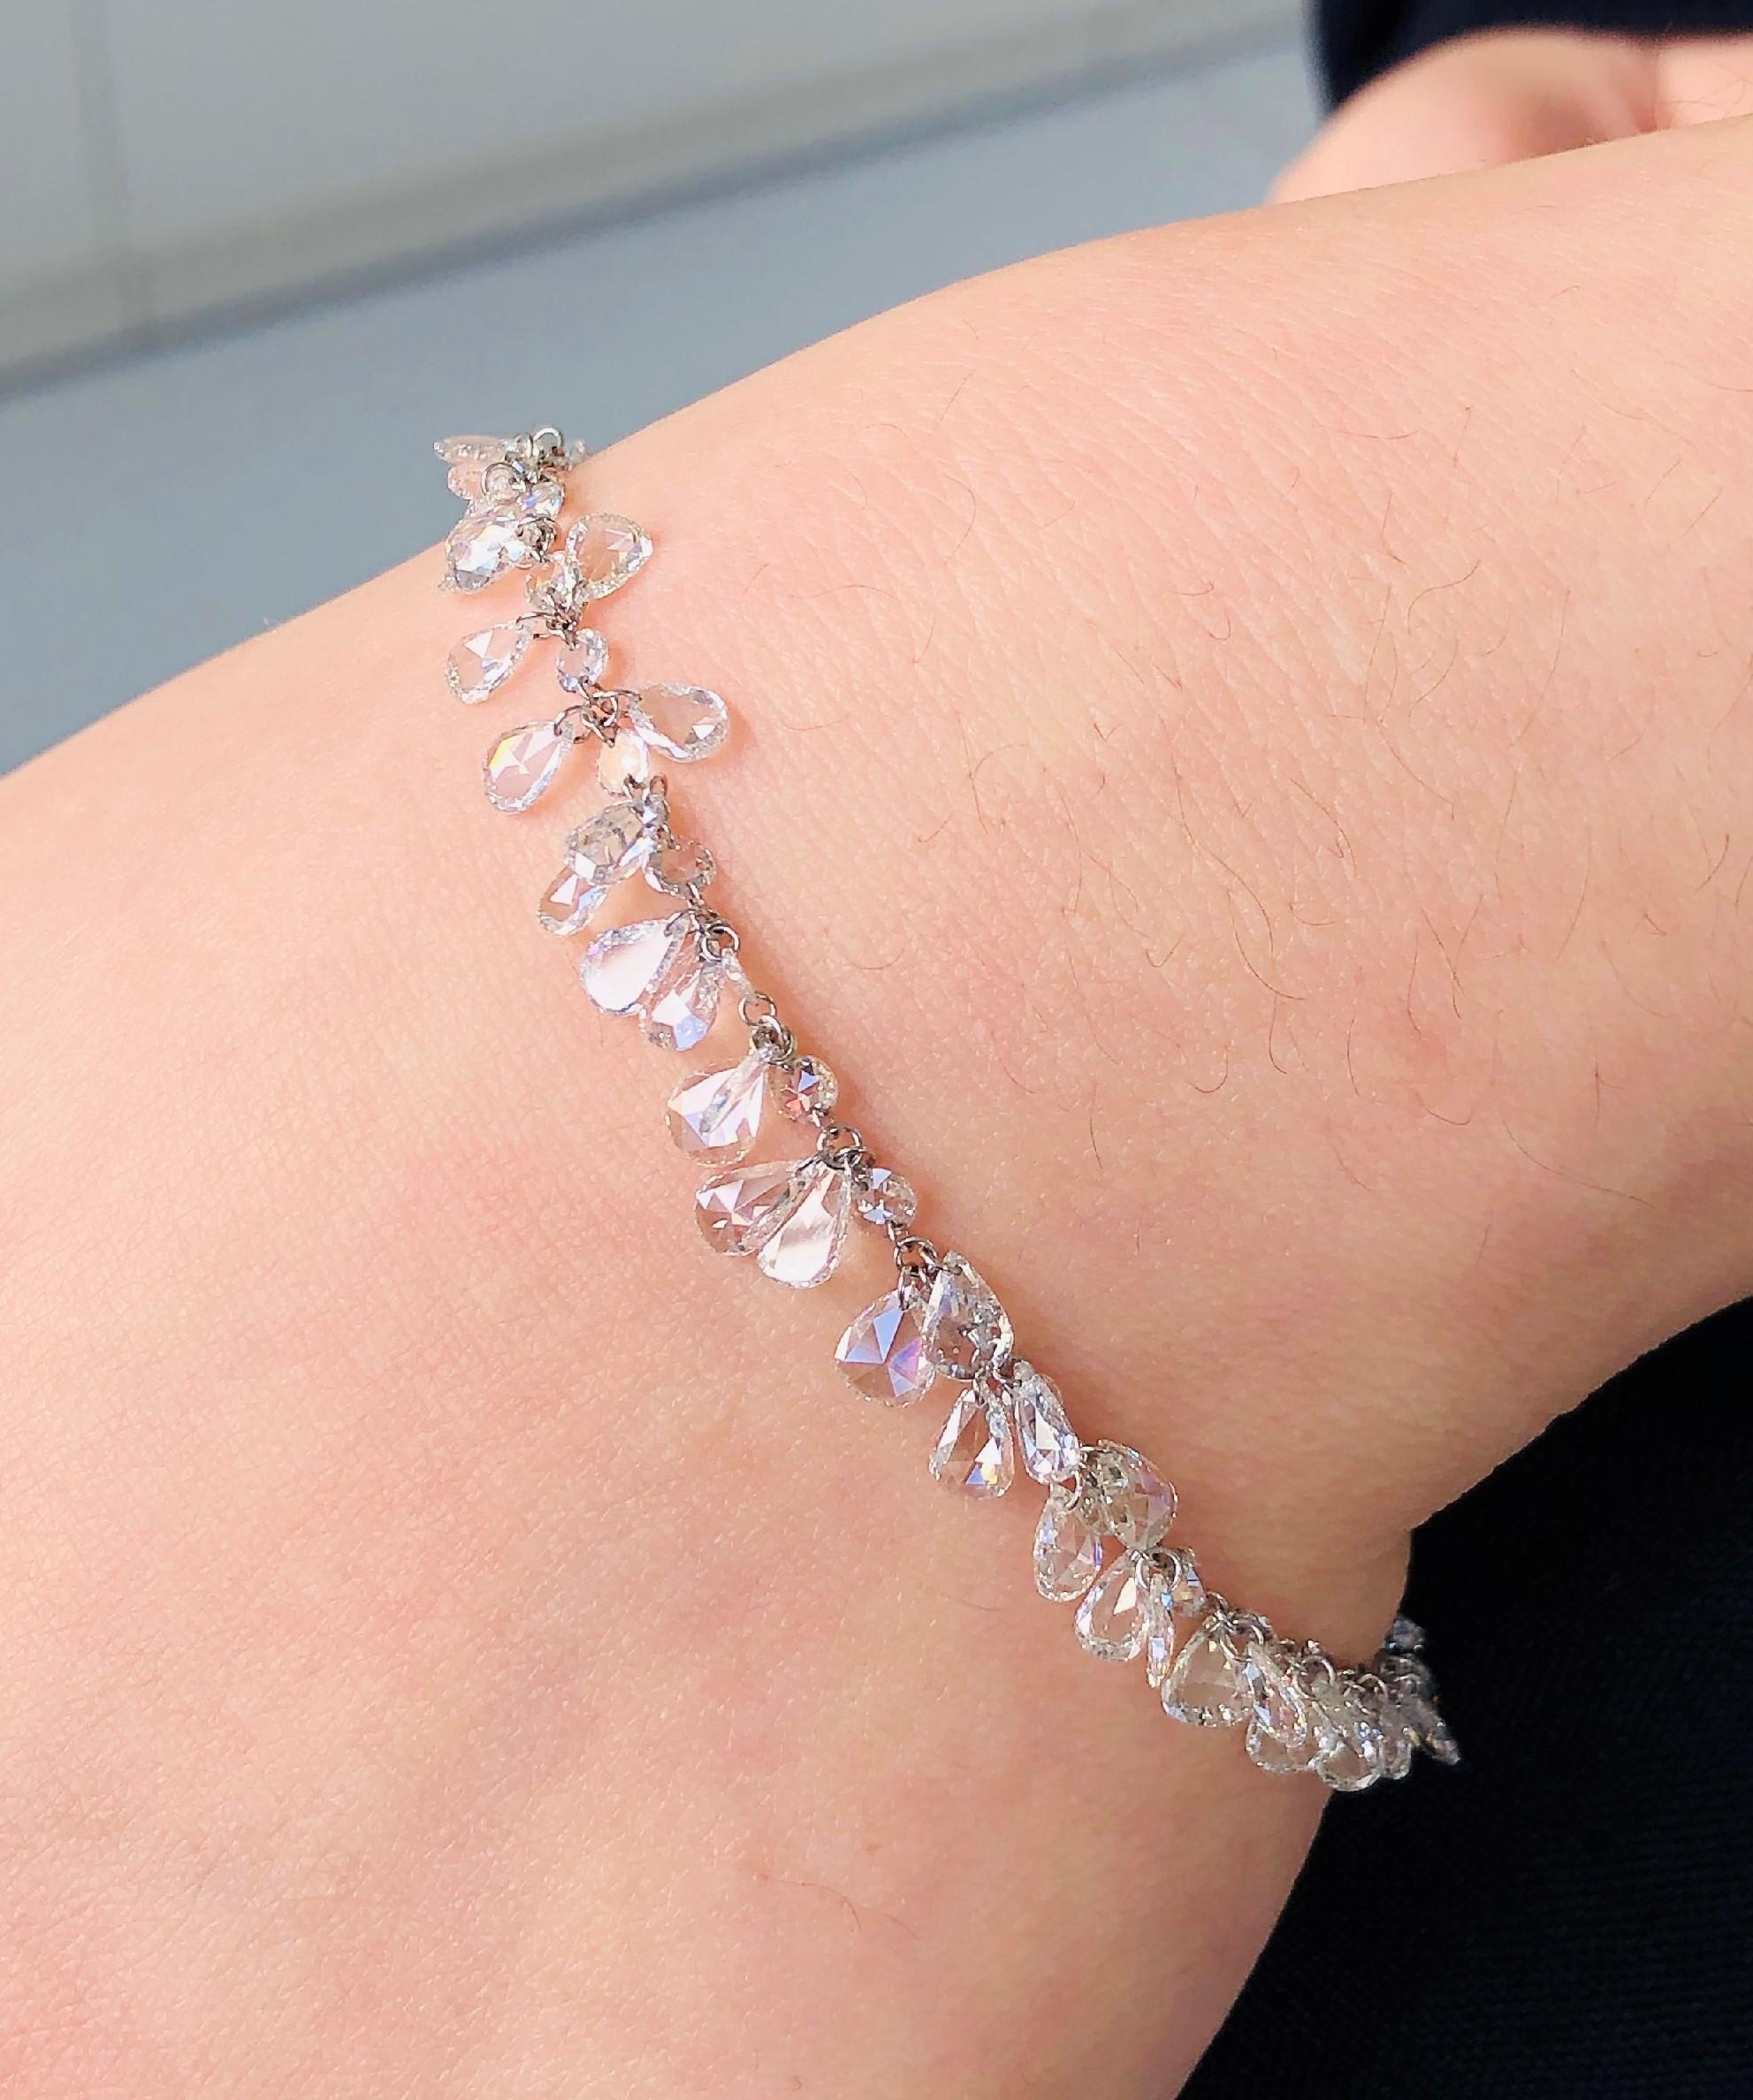 JR 11.01 carats Dangling Rose Cut Diamond Bracelet   

Our dangling rose-cut diamond bracelet is extremely wearable. Its versatility and classic design make it a great accompaniment to various occasions. Beautifully made with Drilled Rose Cut